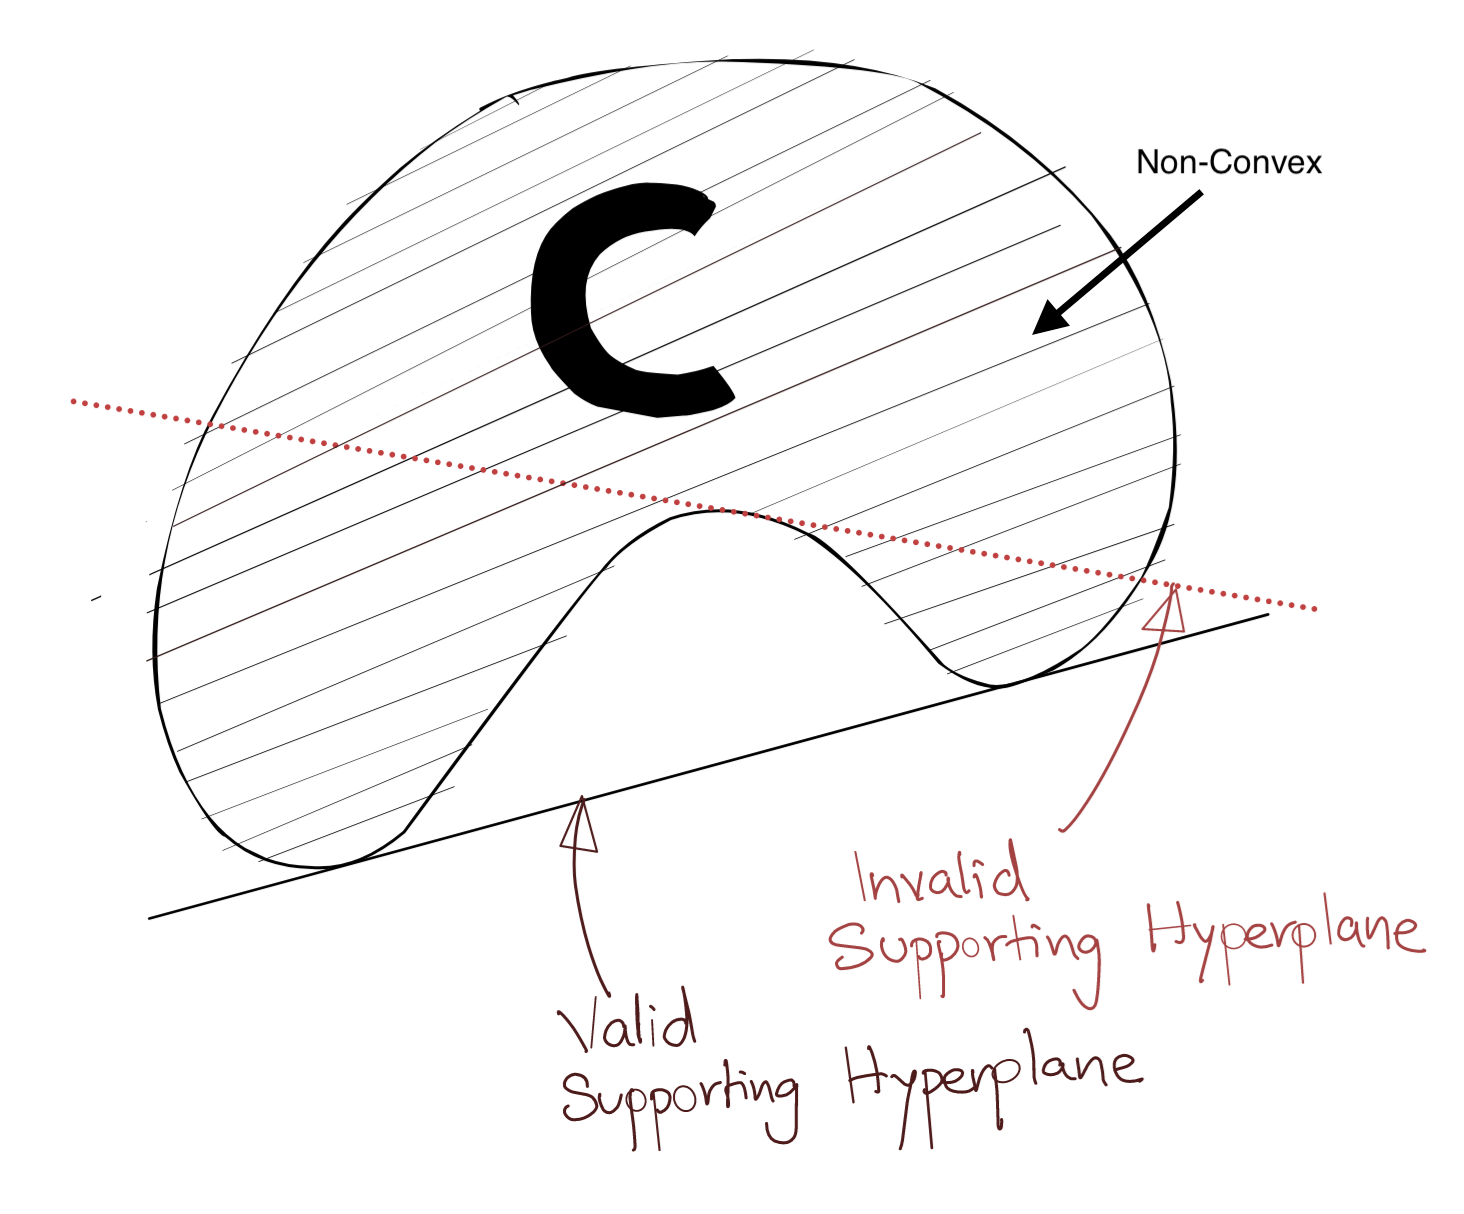 Invalid Supporting Hyperplane for a Non-Convex Set